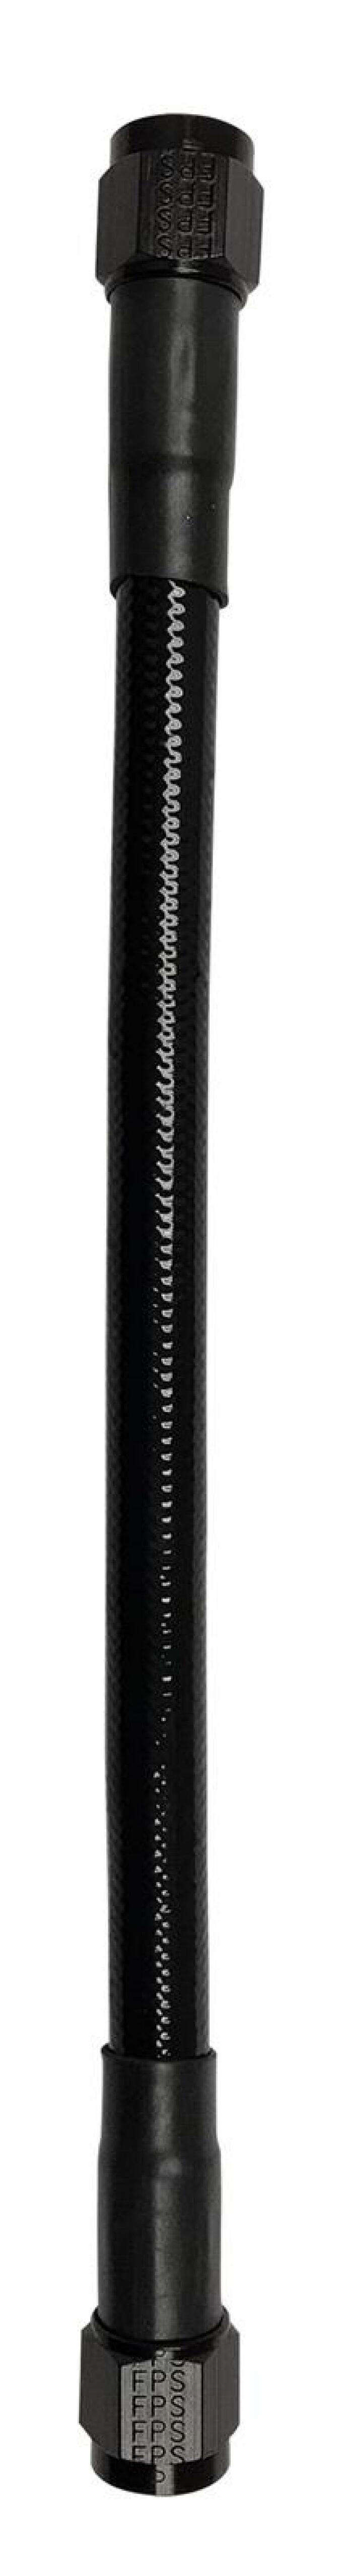 Fragola -10AN Ext Black PTFE Hose Assembly Straight x Straight 48in - 6029-1-1-48BL